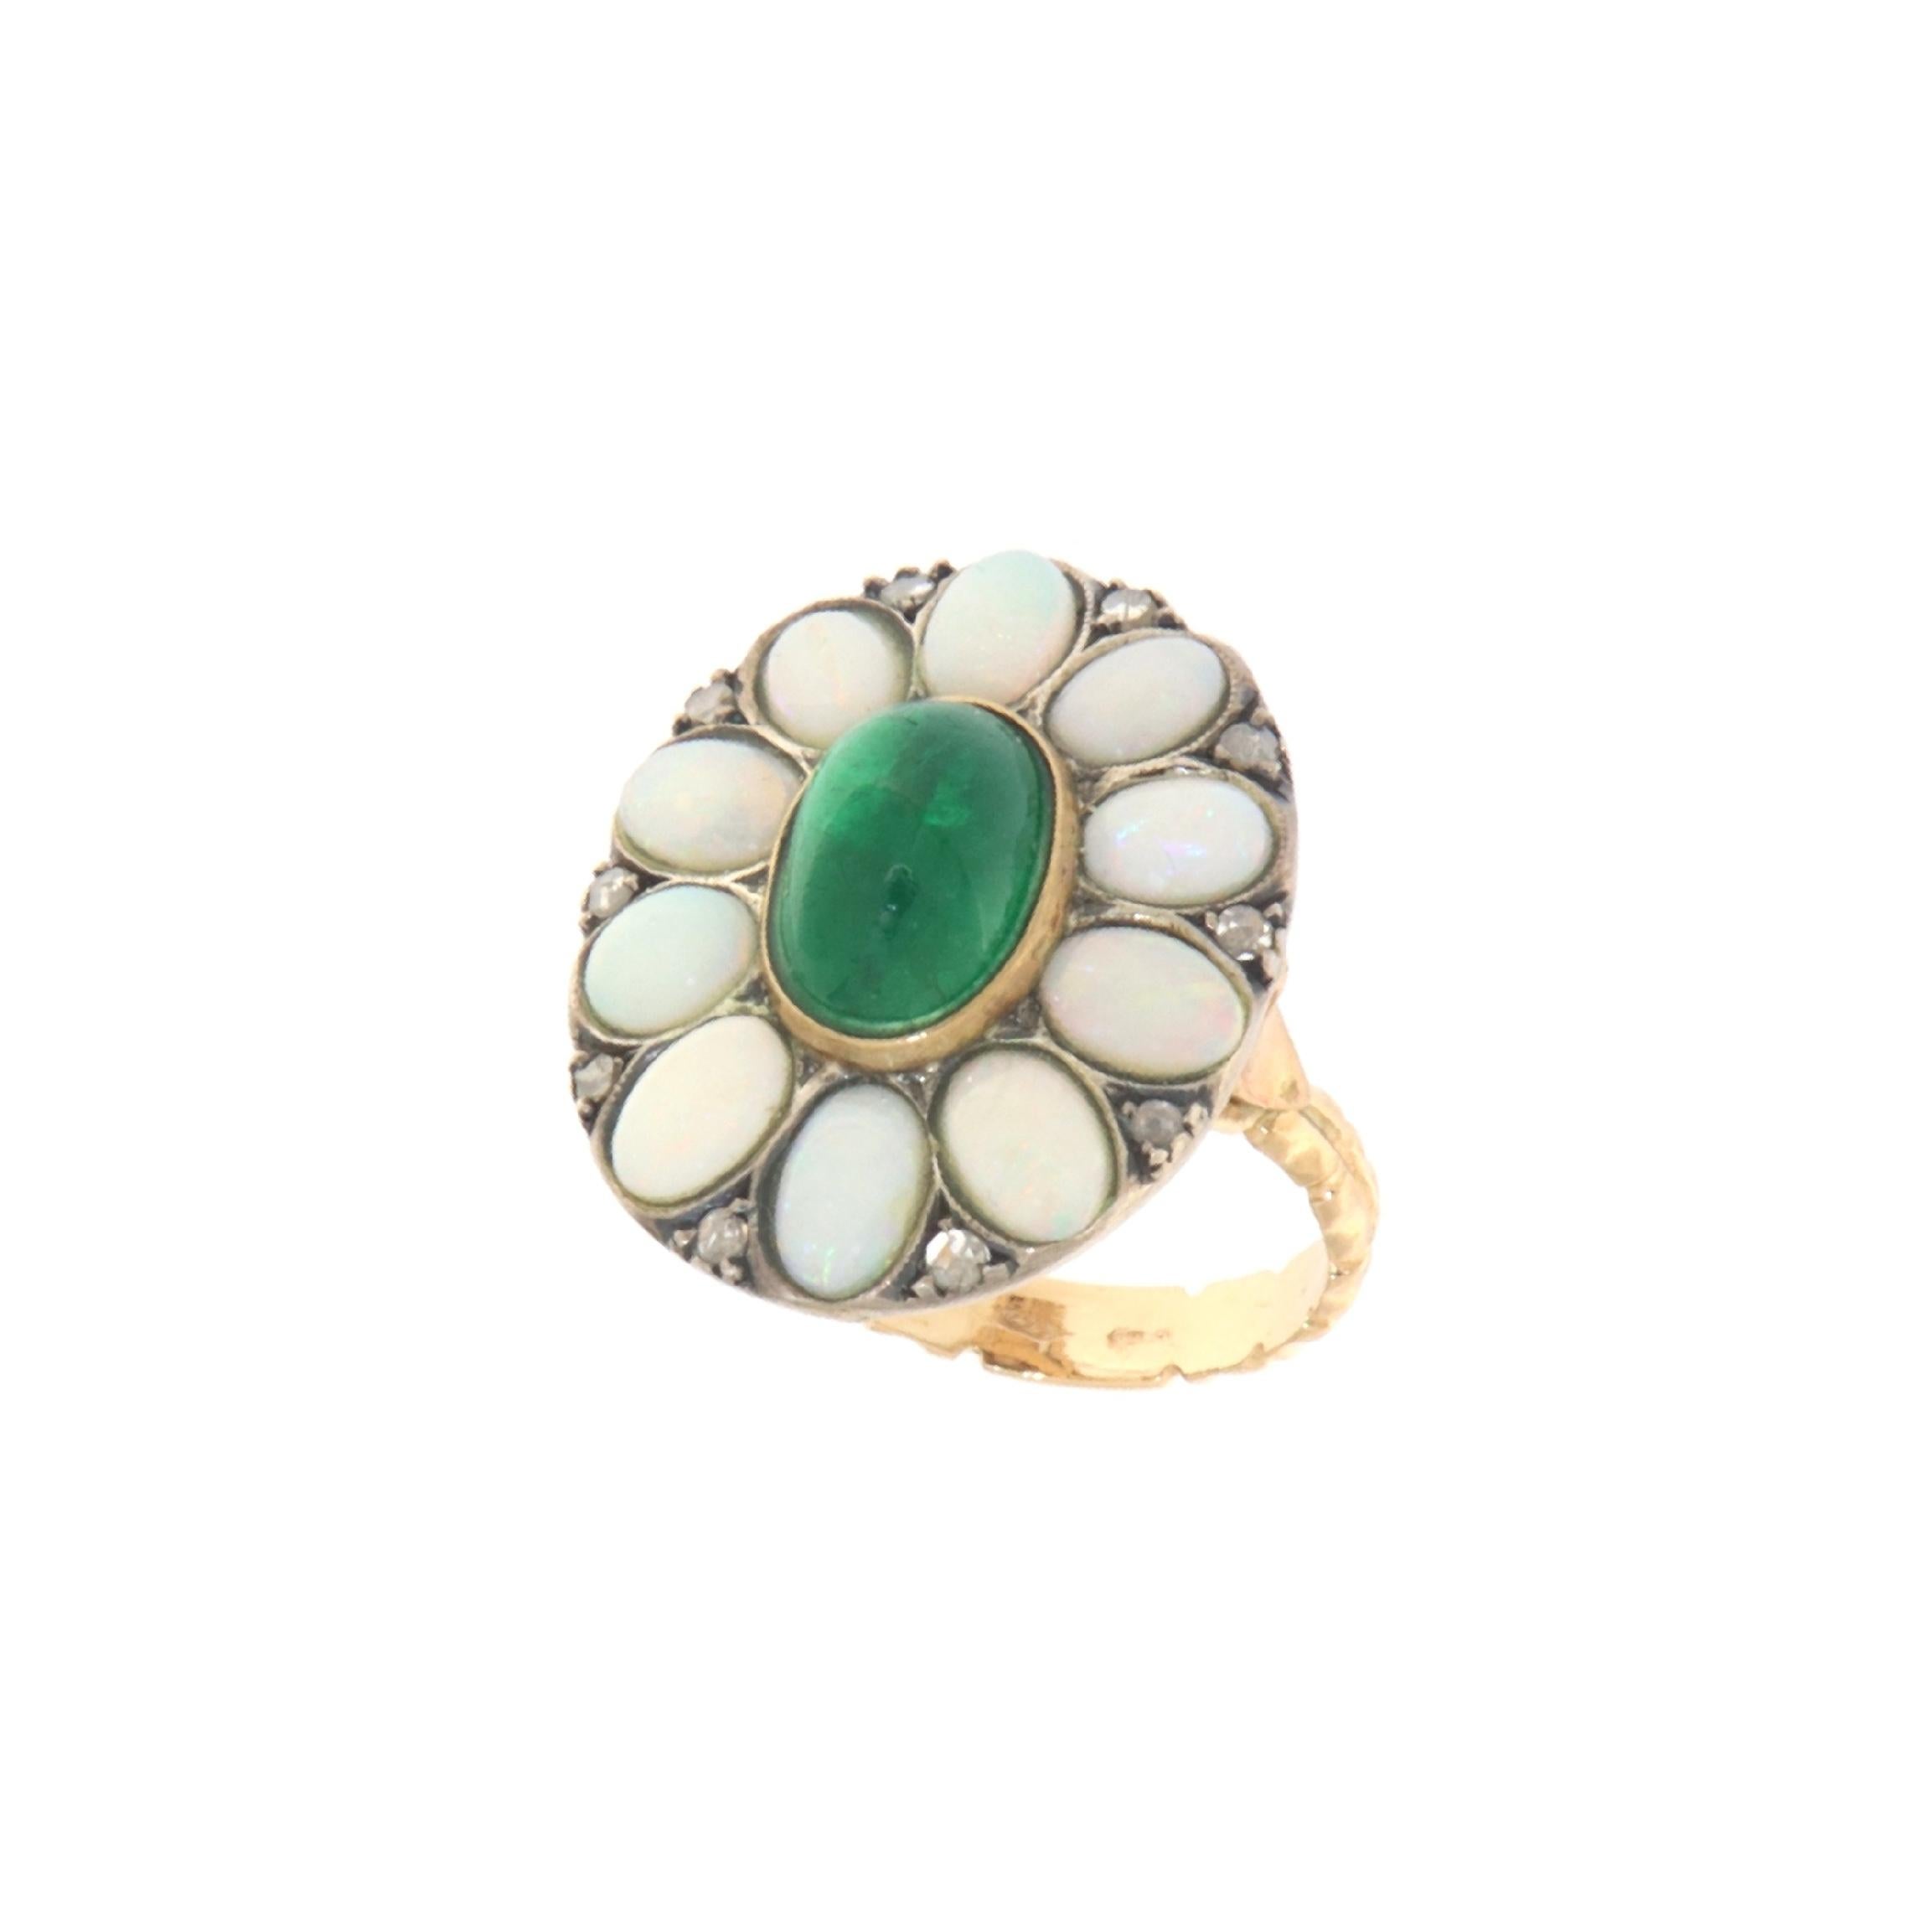 This alluring ring artfully combines 14-karat yellow gold and sterling silver, creating a piece that balances classic elegance with intricate detailing. It features a collection of antique-cut diamonds and Australian opals arranged in a charming